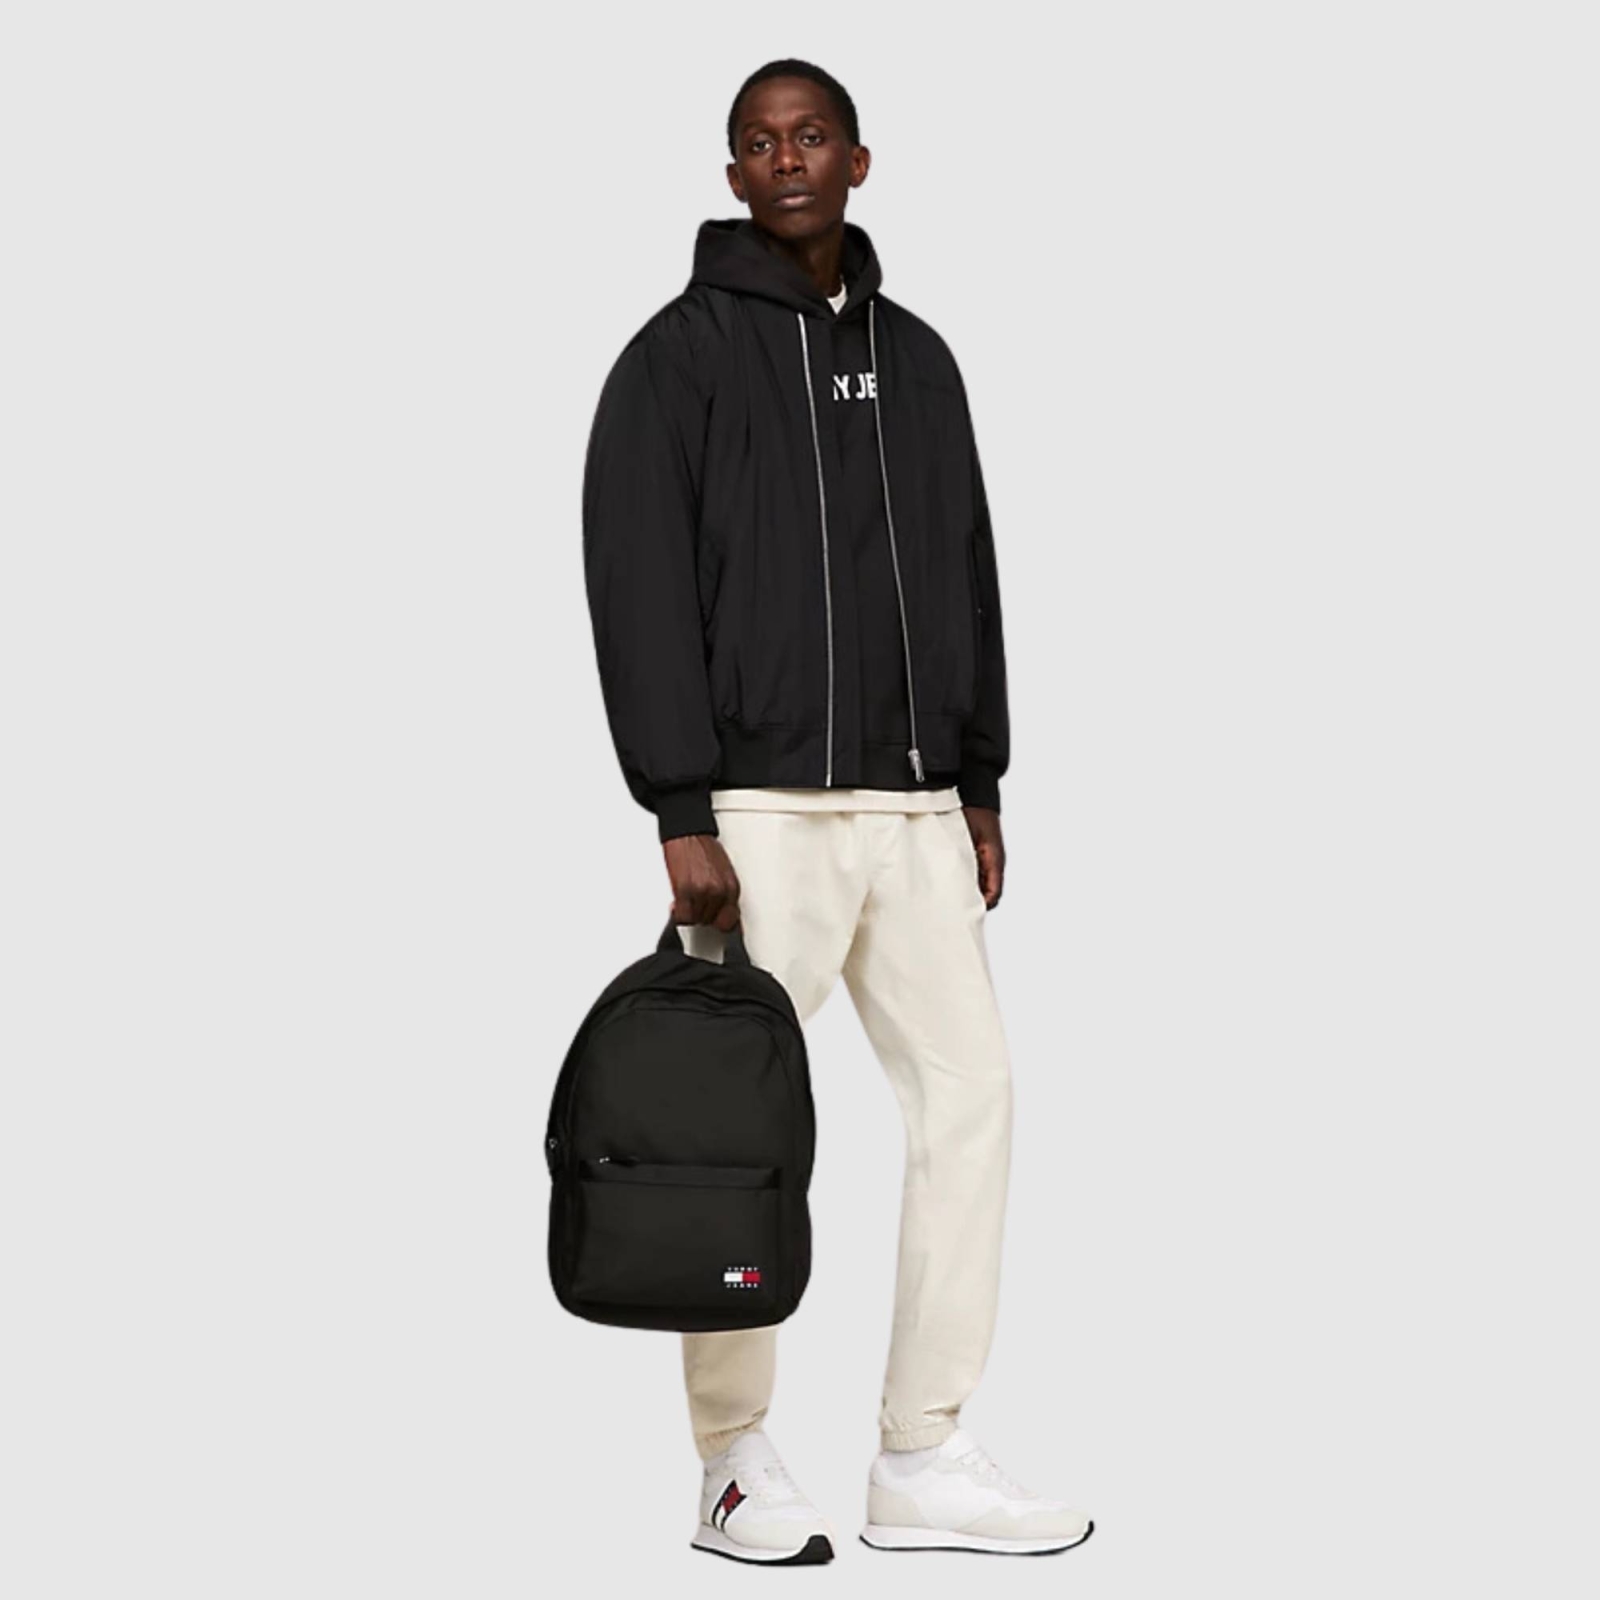 TOMMY DAILY DOME BACKPACK